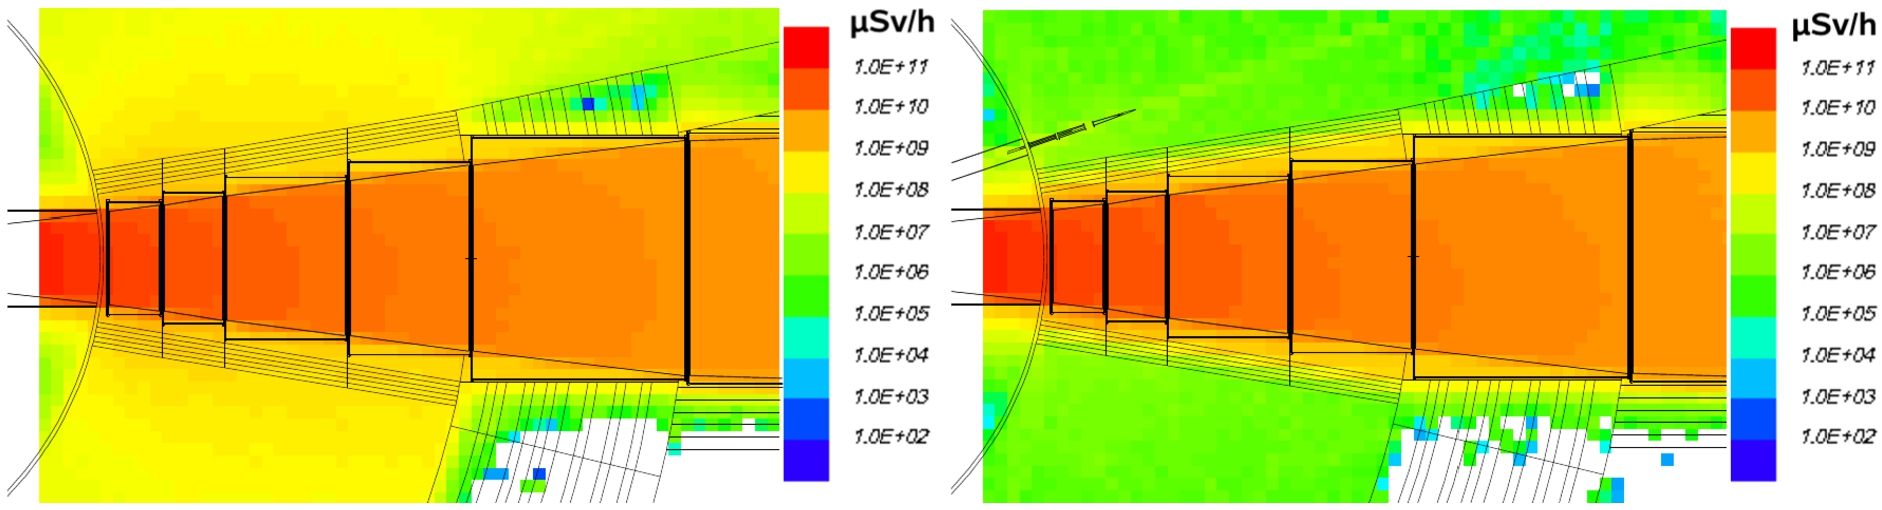 Radiation dose map of the inside the bunker close to the LBP. Left: radiation dose map without additional shielding. Right: dose map with 40 cm thick walls of heavy concrete around the NNBAR beamline.